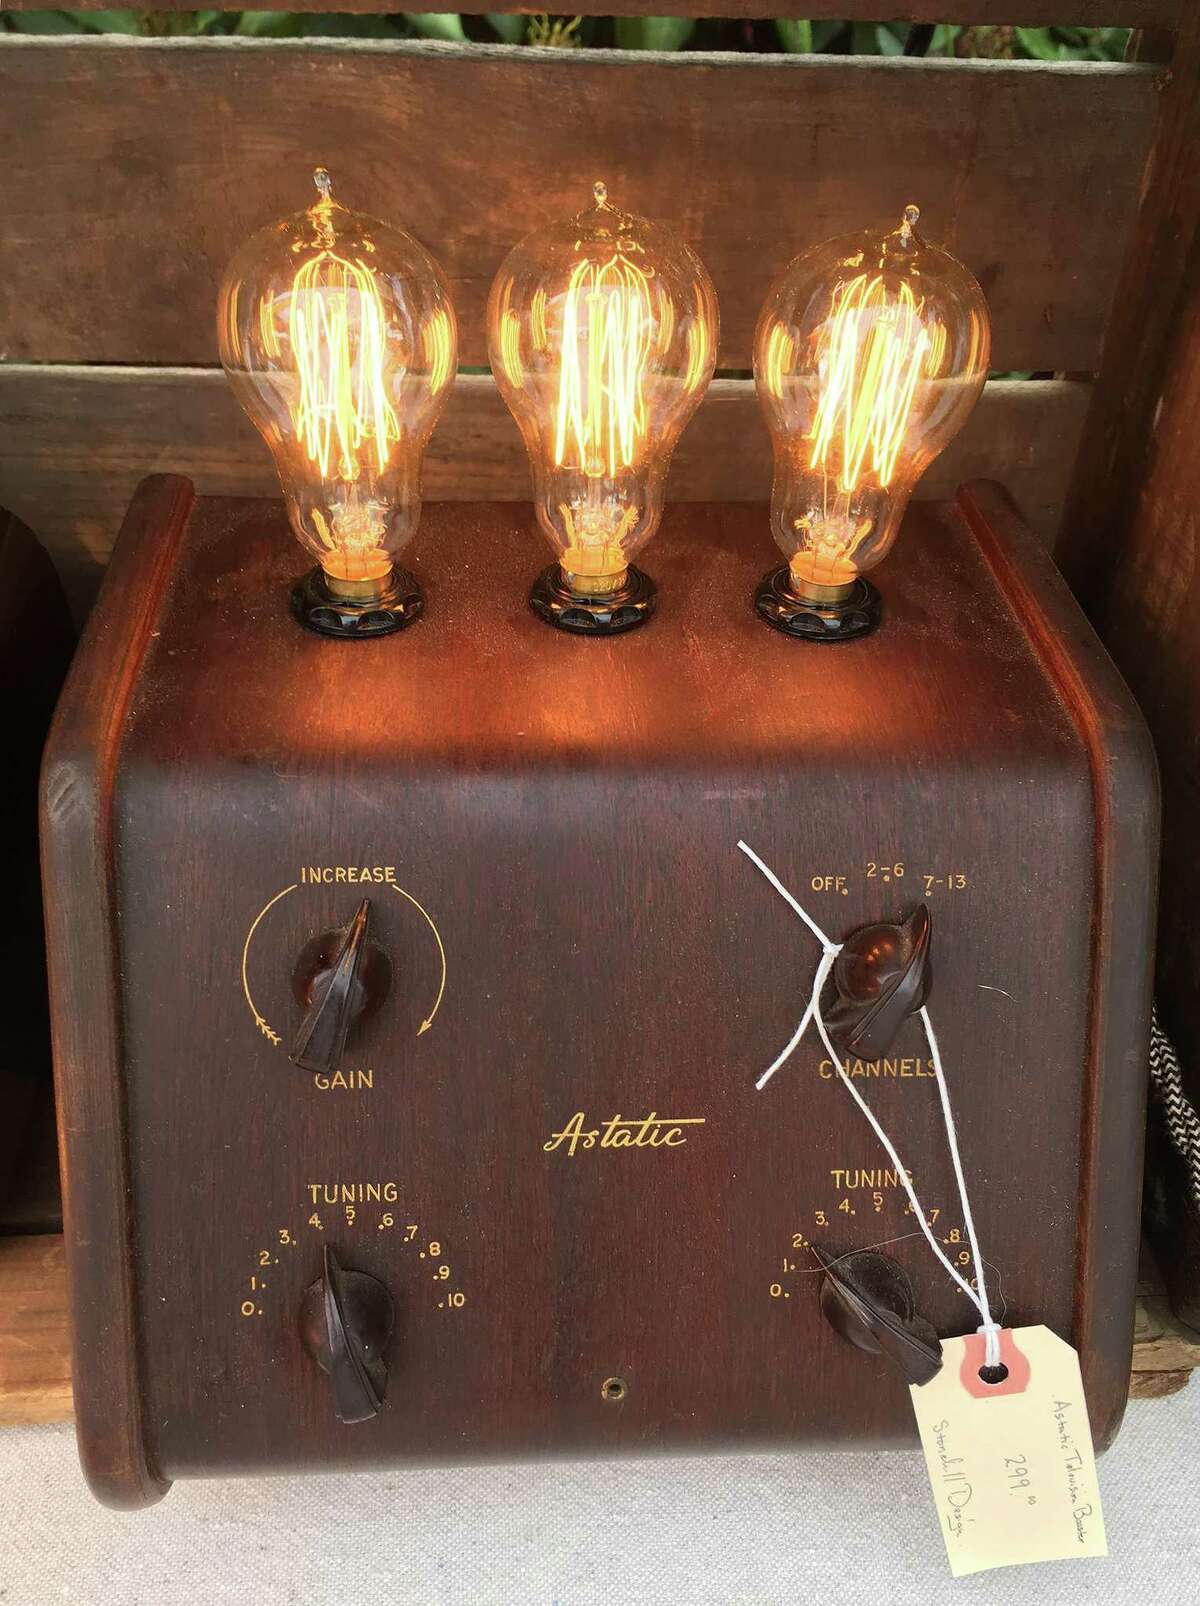 Jason Aleksa, of Fairfield, creates light fixtures out of old objects and appliances.